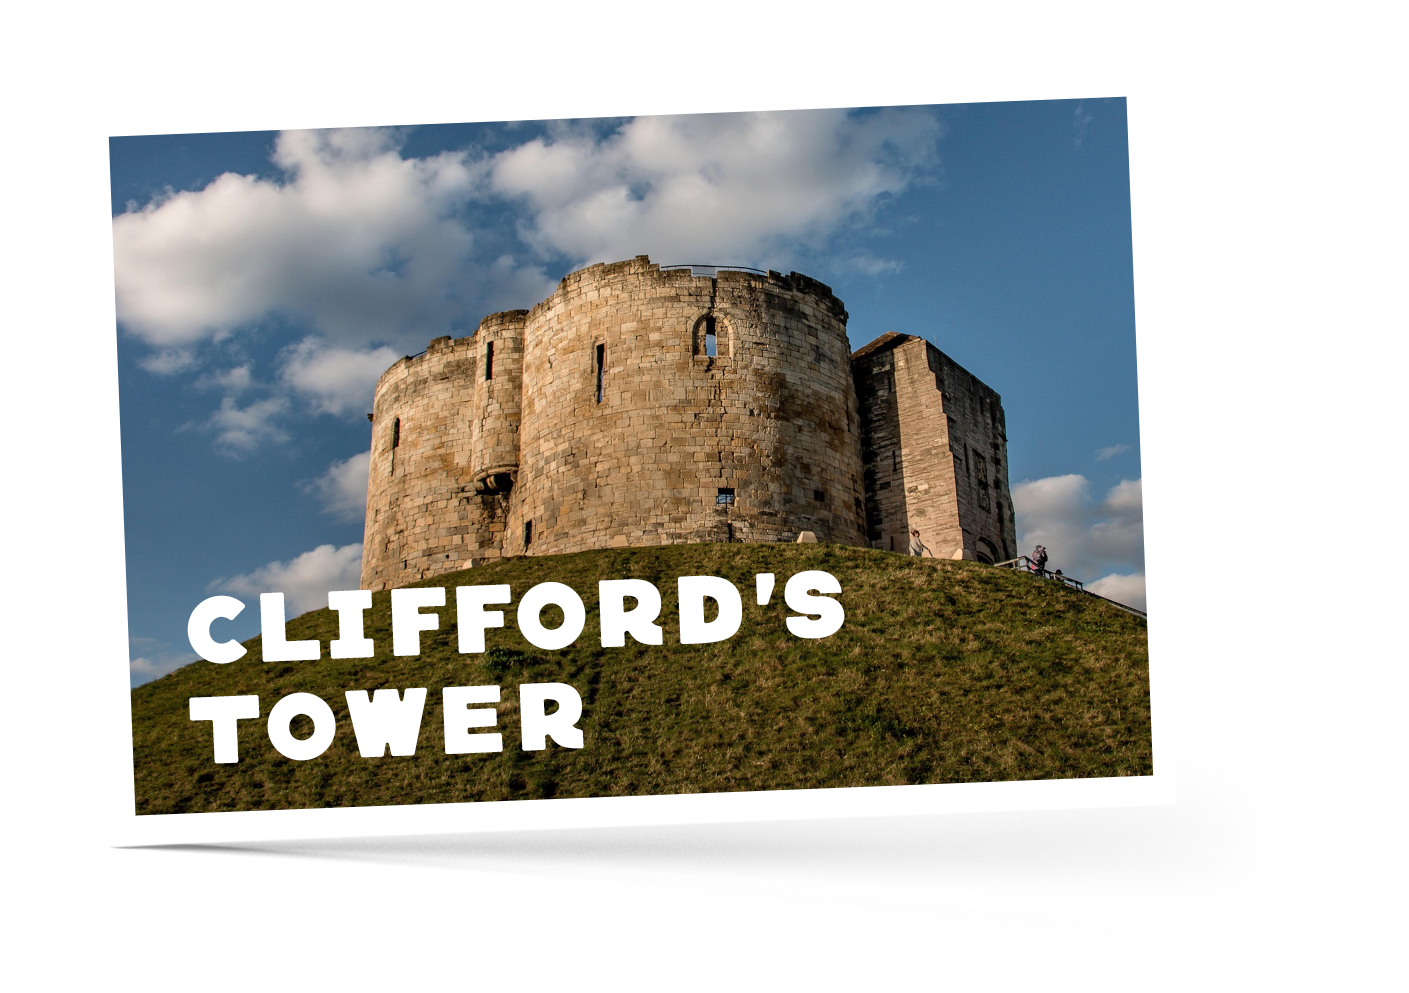 Blue skies at Clifford’s Tower in York